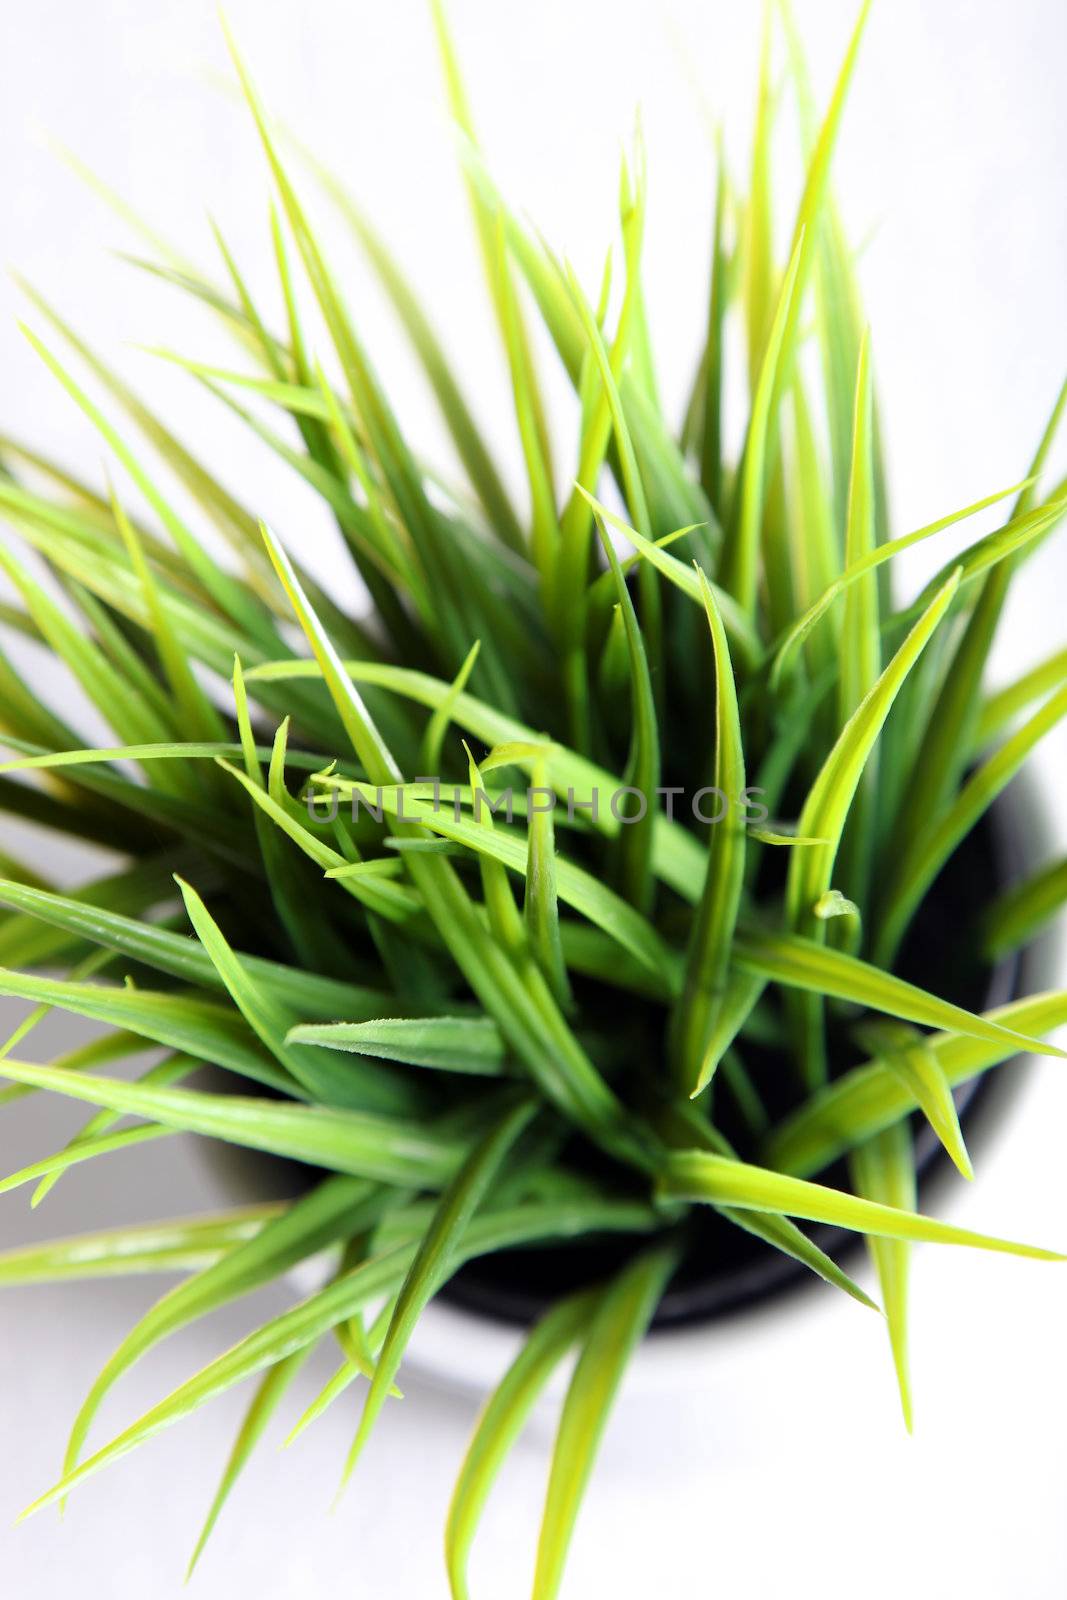 Overhead view of healthy fresh green grass growing in a pot against a white studio background Overhead view of healthy fresh green grass growing in a pot against a white studio background